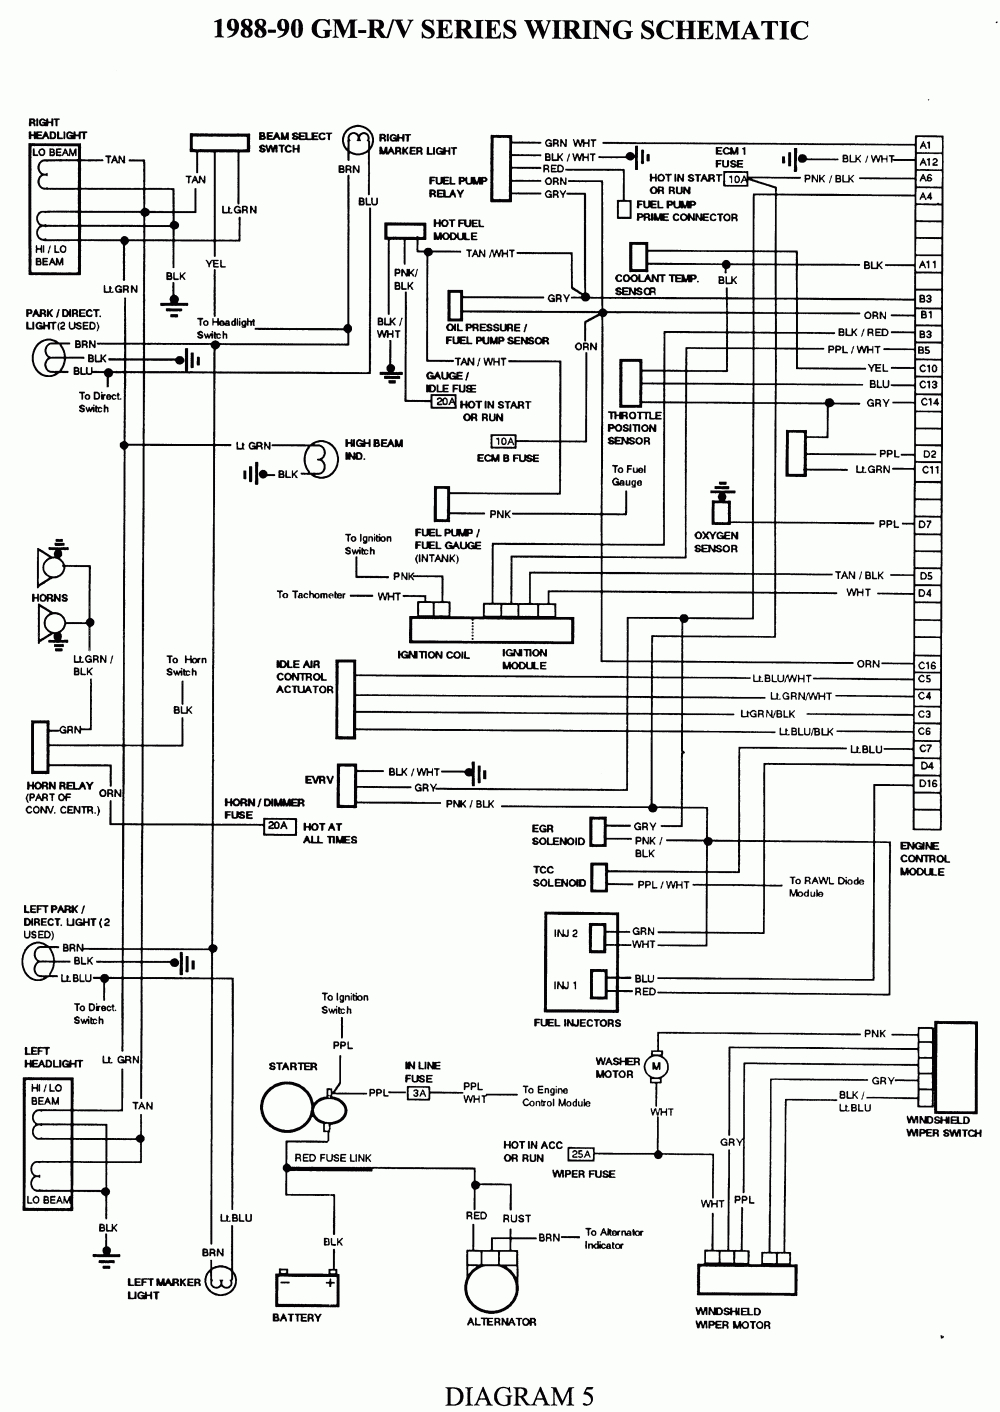 Diagram 1987 Chevy Truck Fuel Pump Wiring Diagram Picture Full Version Hd Quality Diagram Picture Dogdiagrams Helene Coiffure Rouen Fr